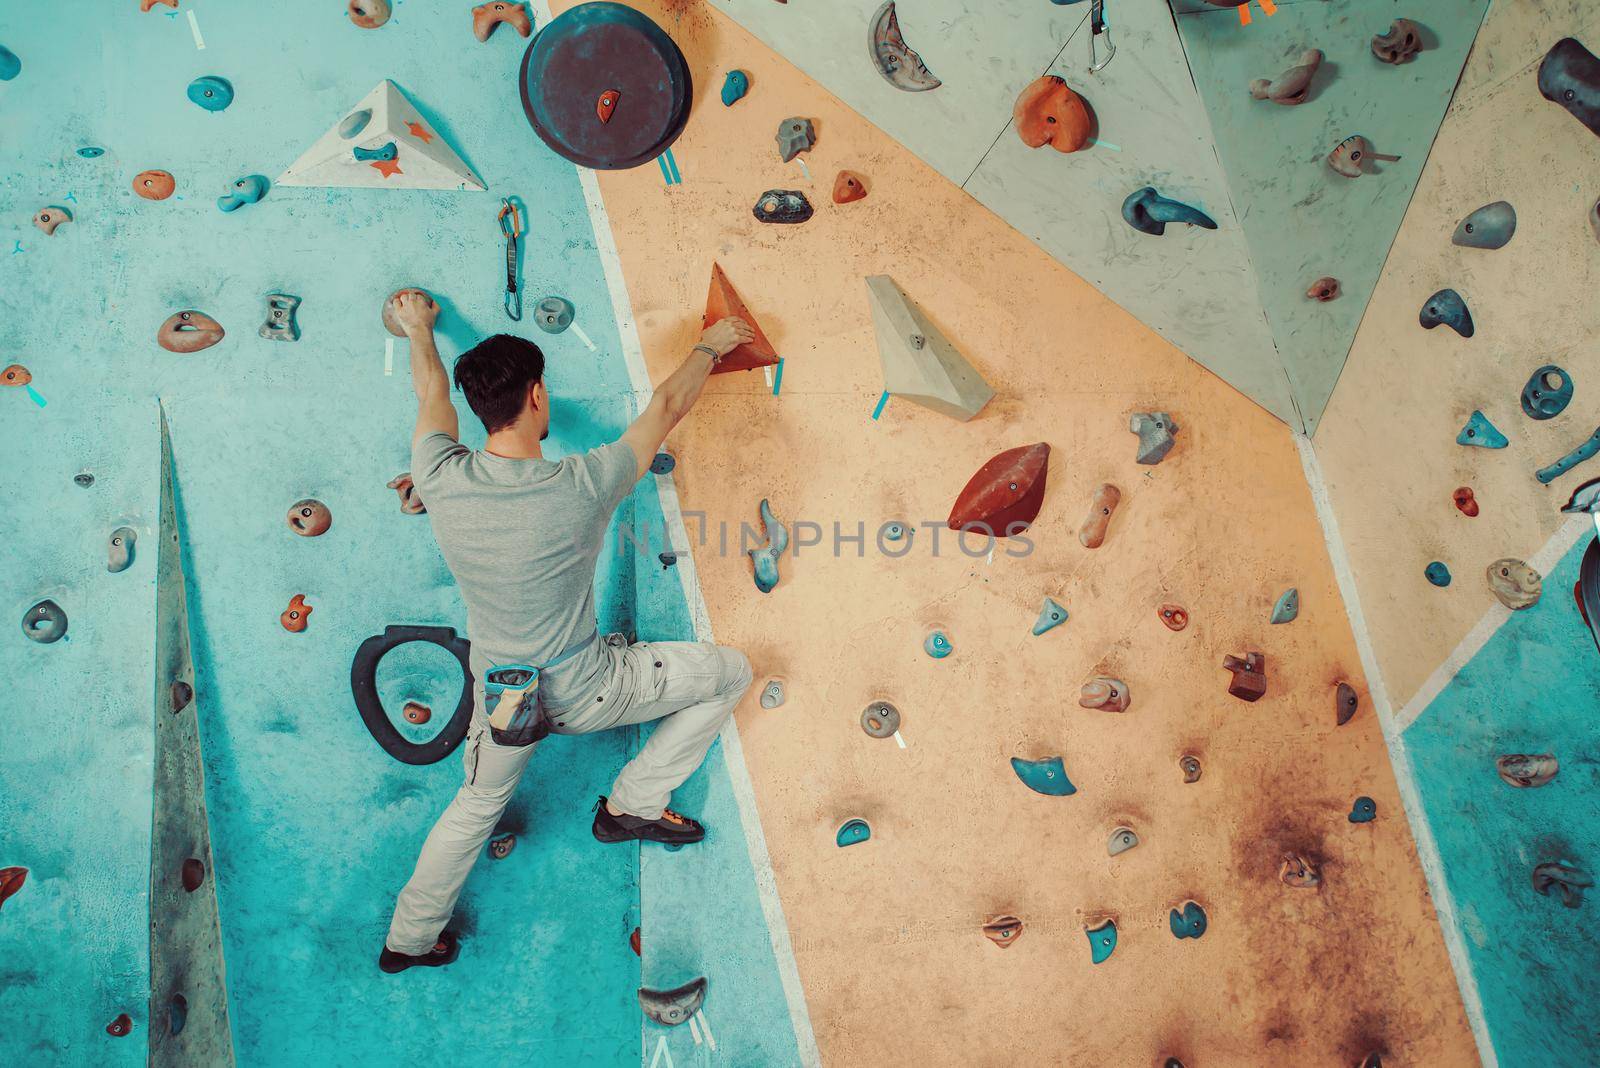 Young man climbing on artificial boulders wall indoor, rear view